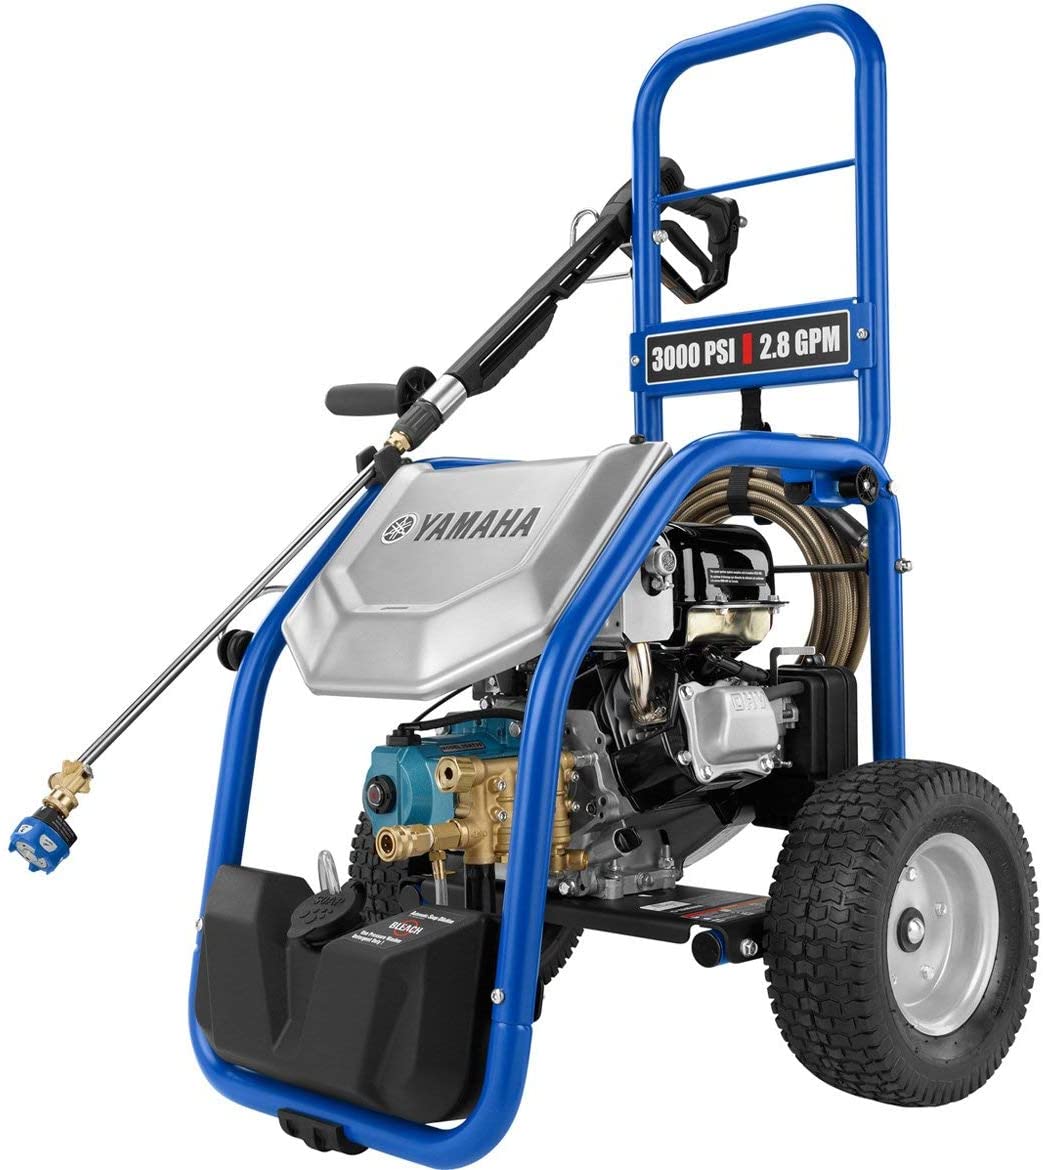 Yamaha 3000 PSI 2.8 GPM Gasoline Pressure Washer with CAT Pump